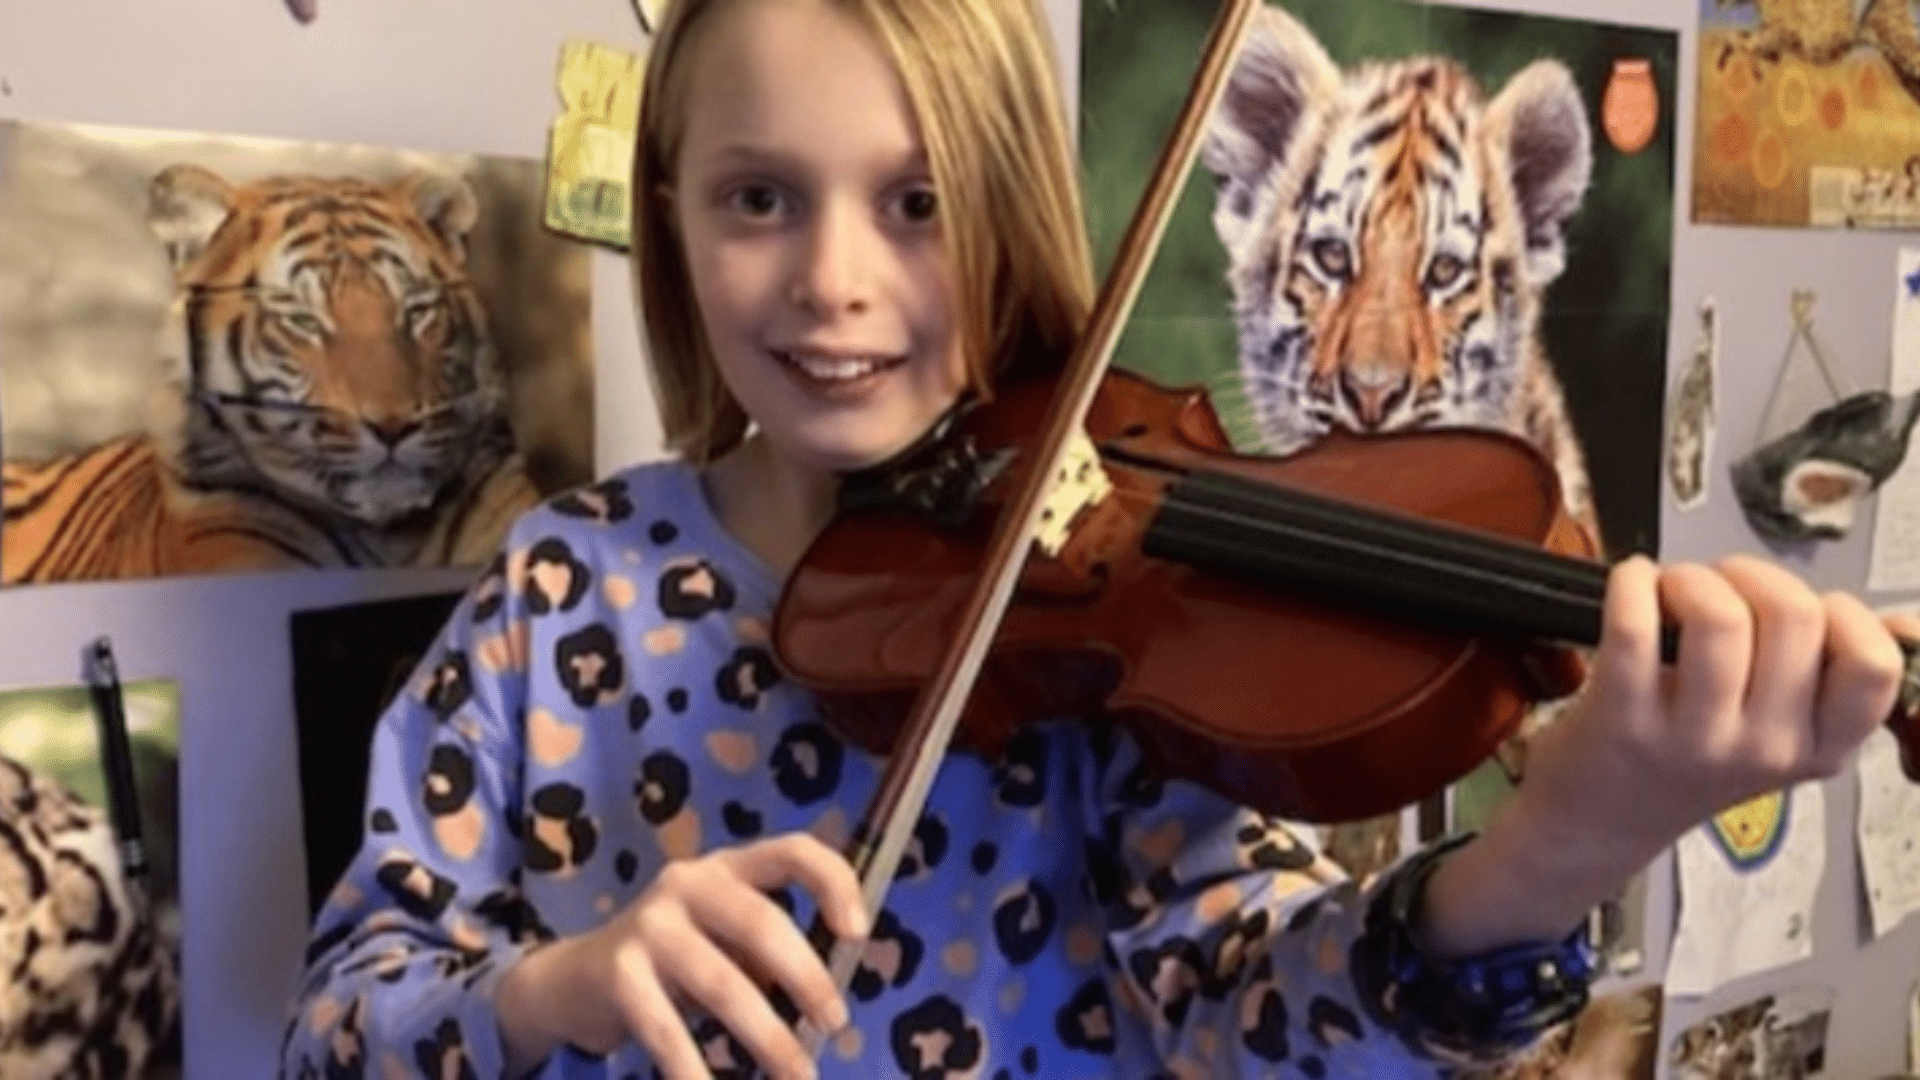 10-year-old Niobe has a performance of a lifetime!